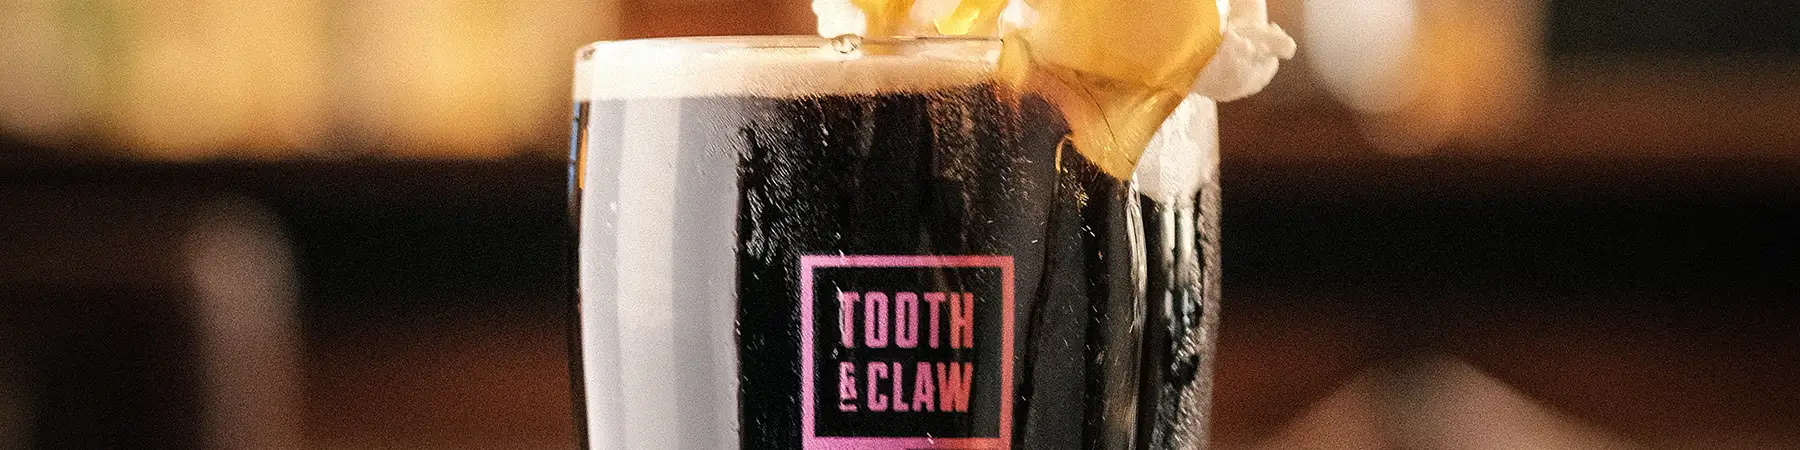 pint of tooth & claw beer being poured